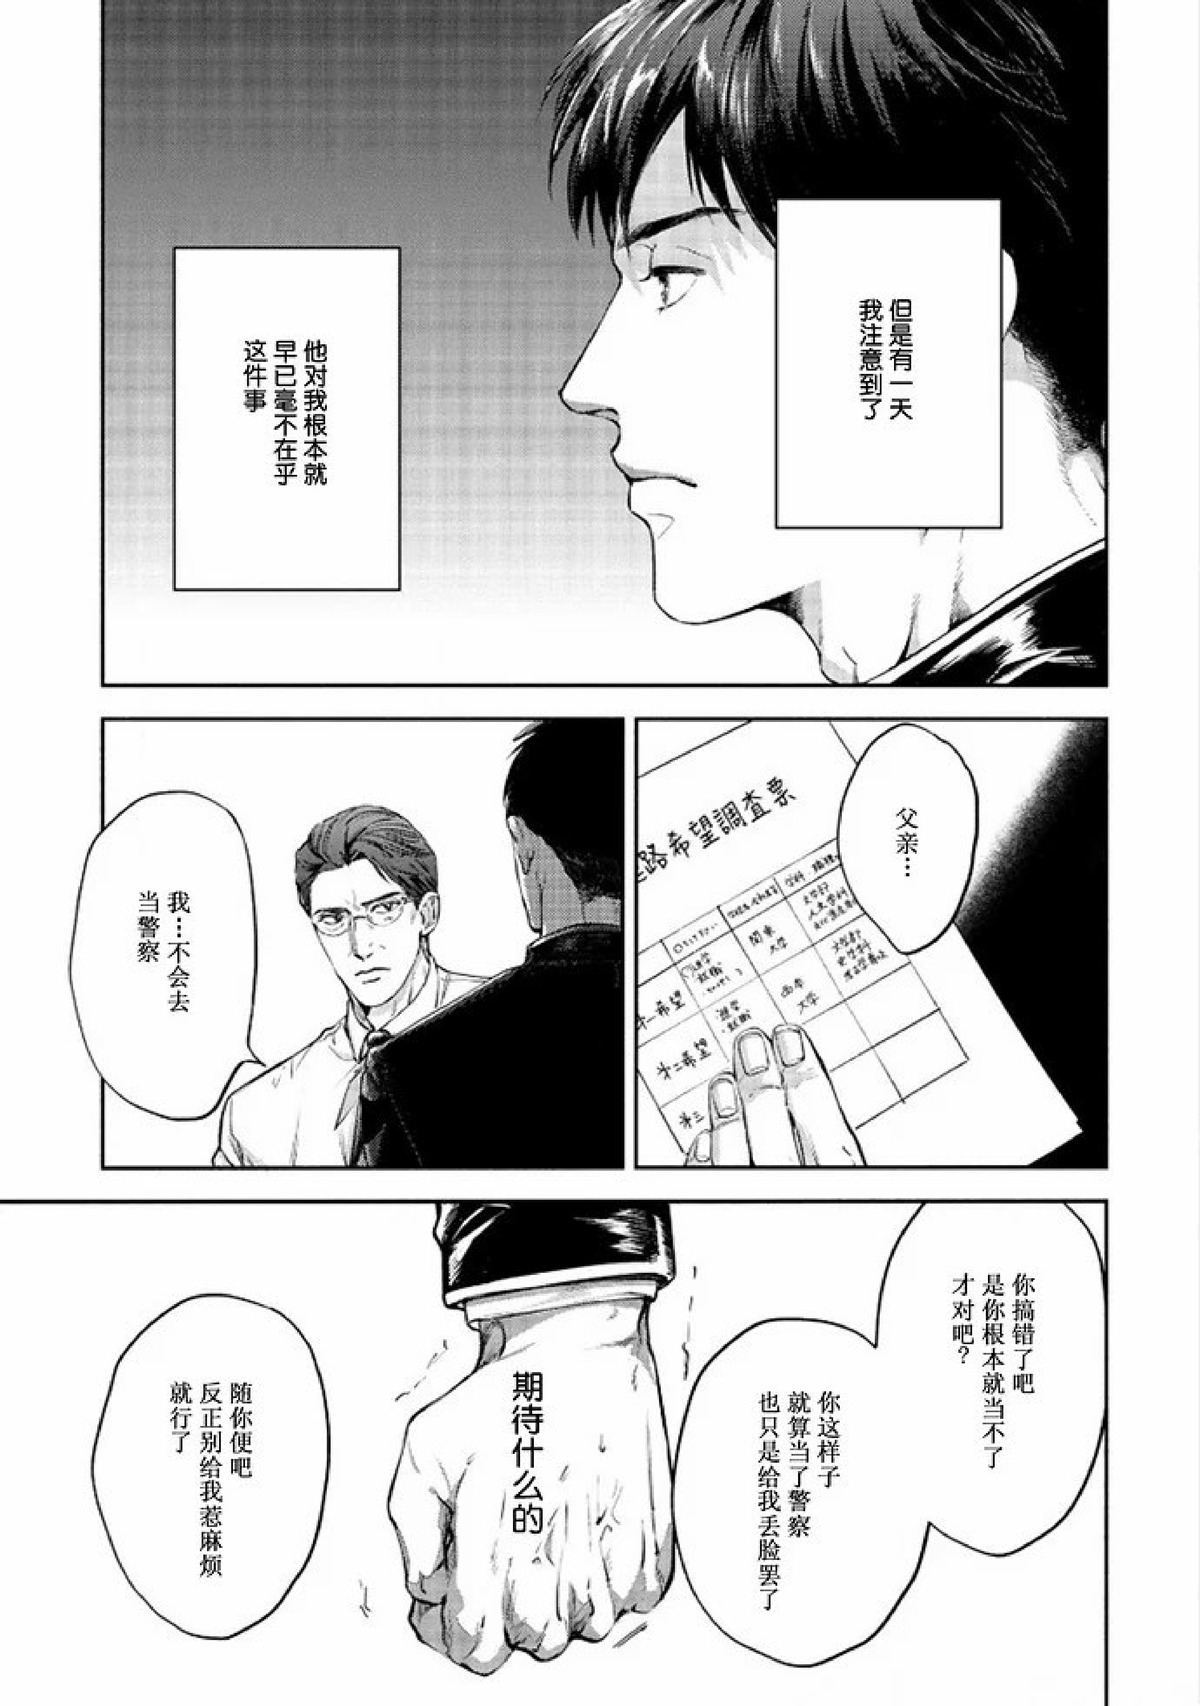 【Two sides of the same coin[腐漫]】漫画-（上卷01-02）章节漫画下拉式图片-23.jpg